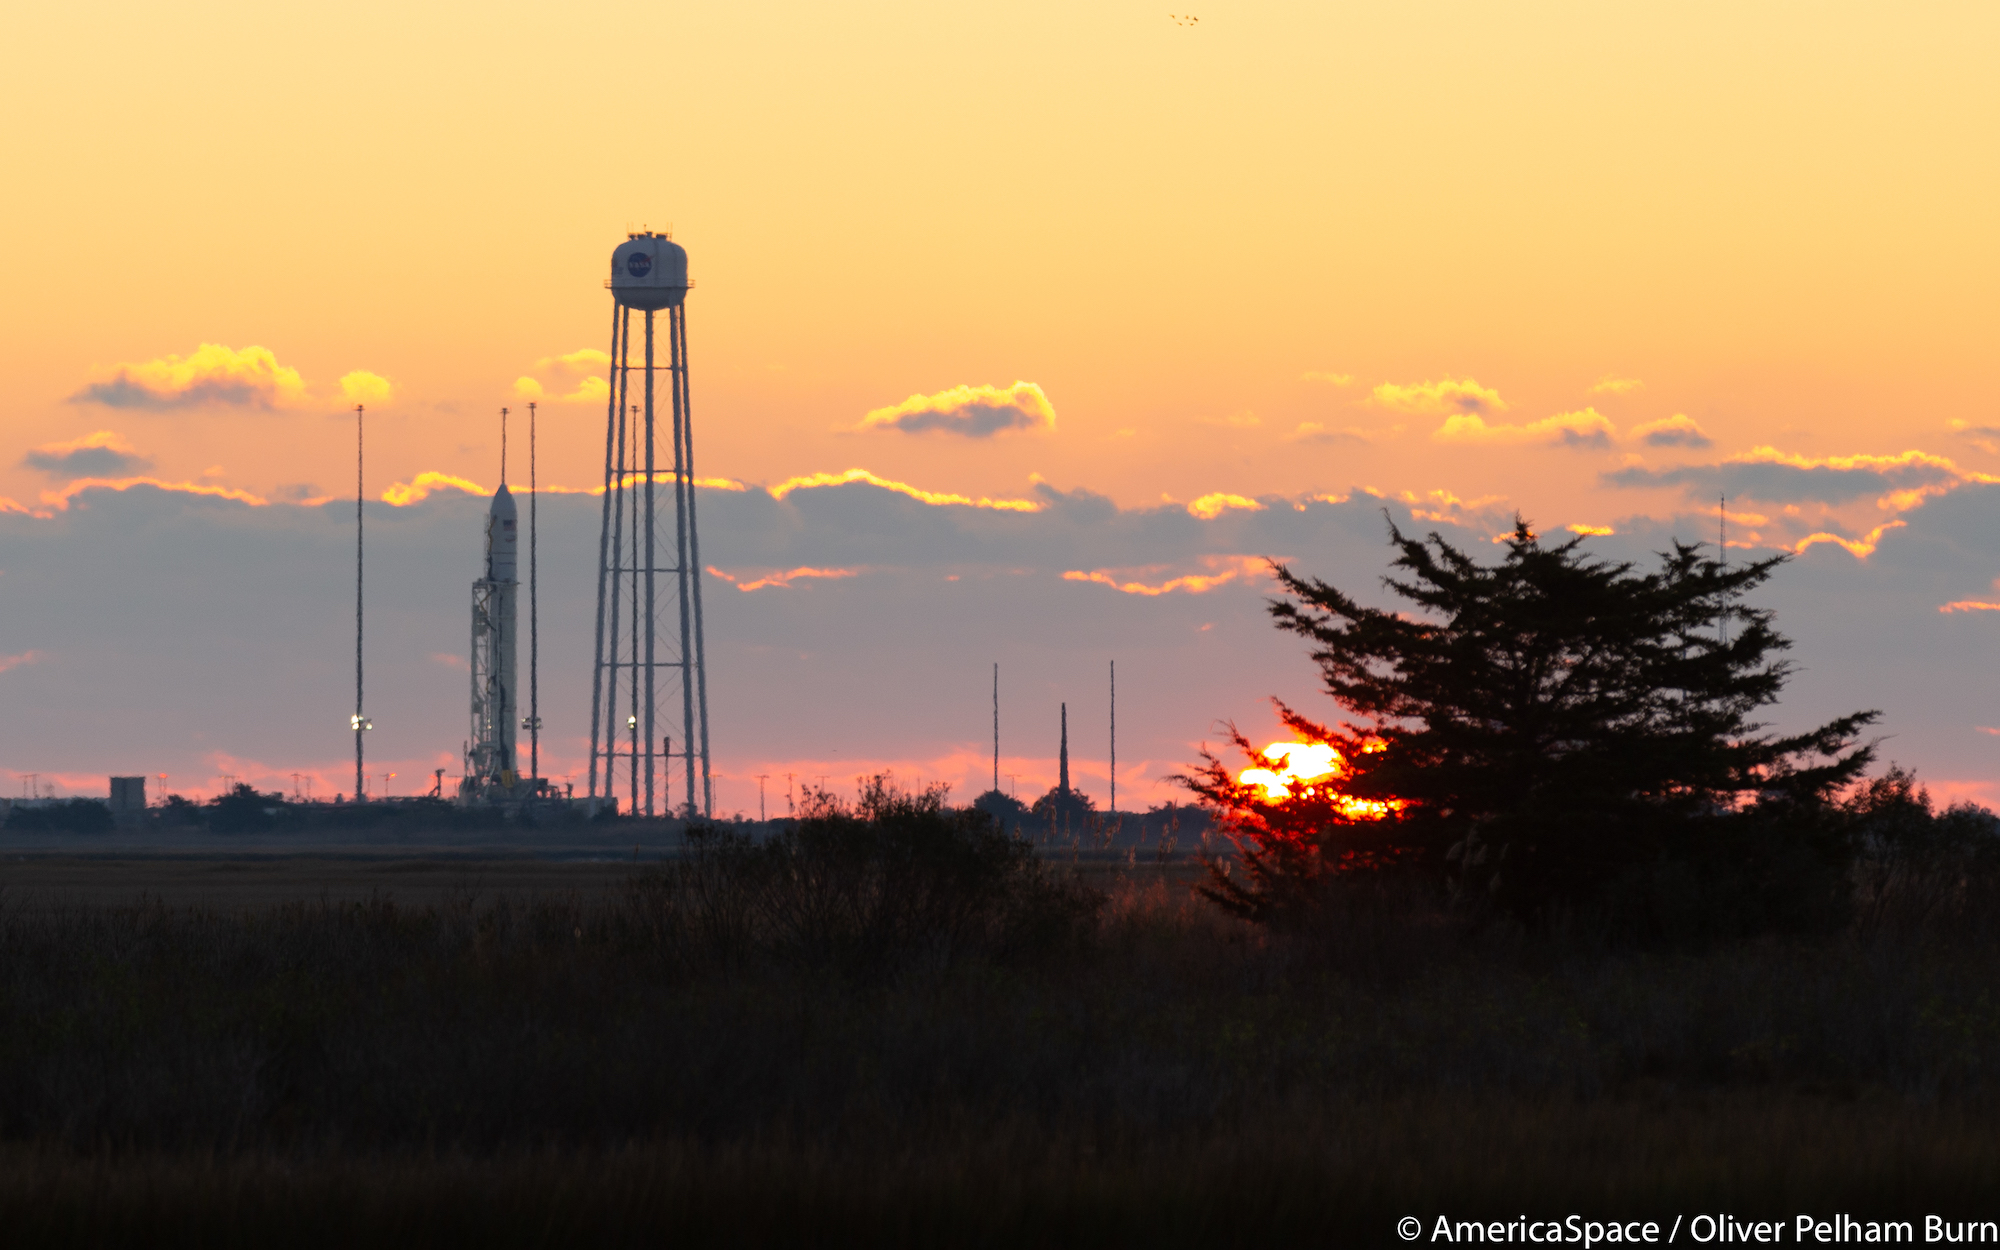 Sunrise on launch day with Antares NG-12. Photo Credit: Oliver Pelham Burn / AmericaSpace.com